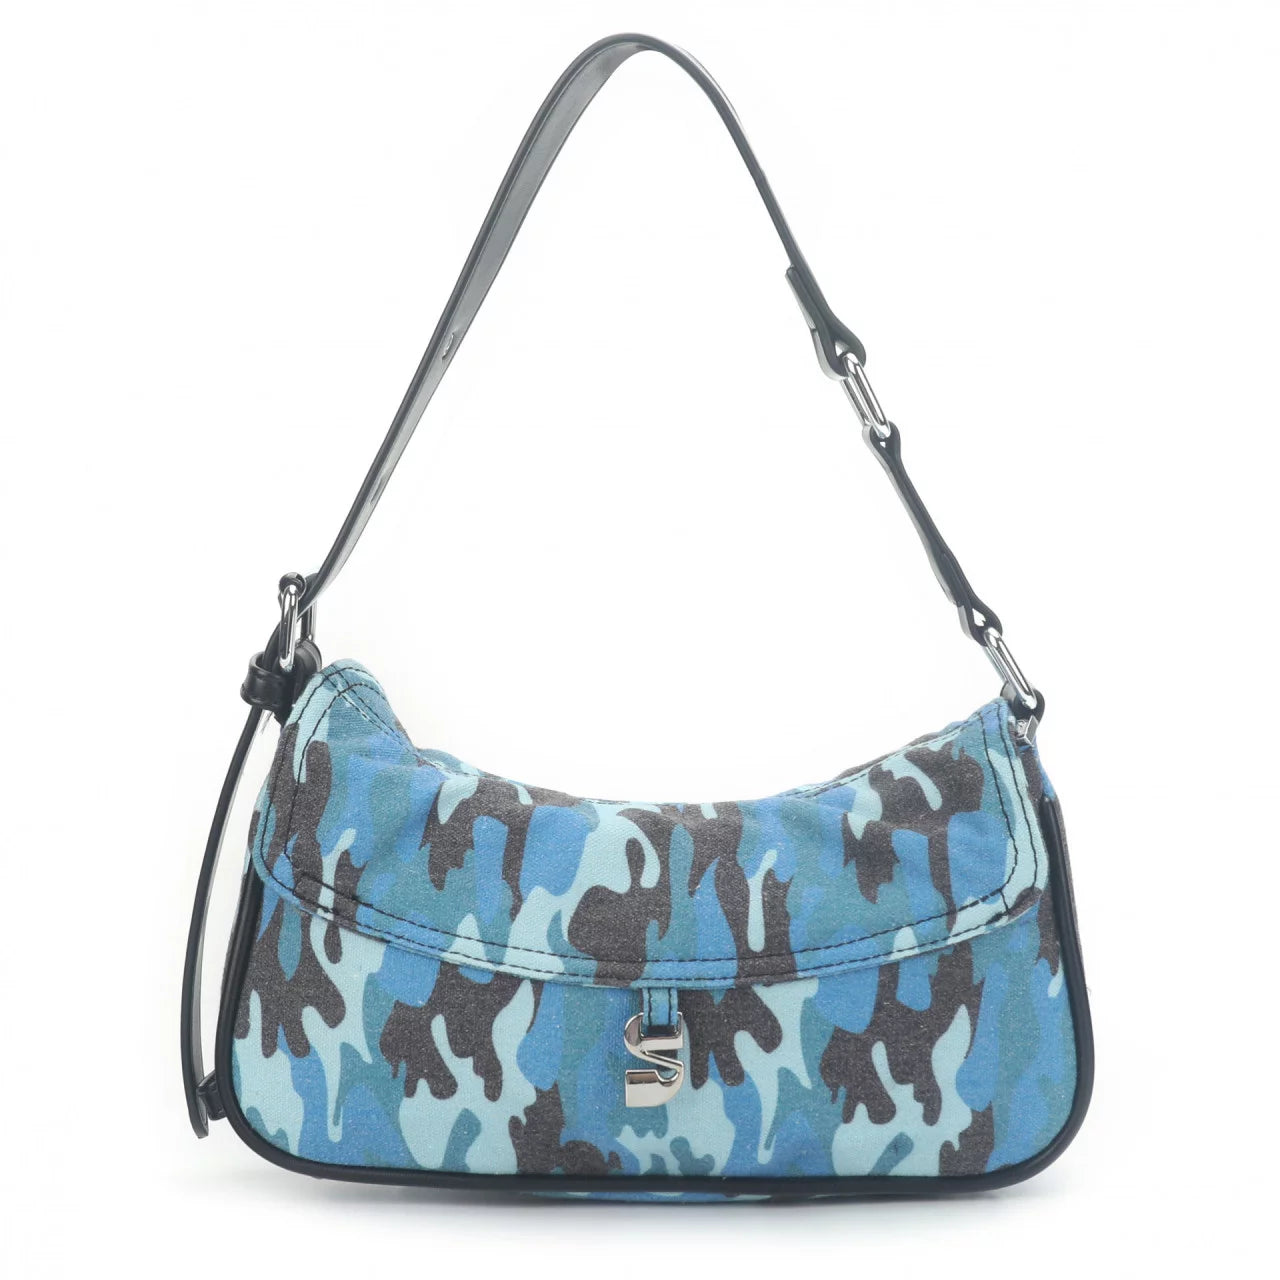 THE CLEO SHOULDER MINI BAG - CAMOUFLAGE BLUE - EXCLUSIVE Bags from SILFEN - Just €70! SHOP NOW AT IAMINHATELOVE BOTH IN STORE FOR CYPRUS AND ONLINE WORLDWIDE @ IAMINHATELOVE.COM